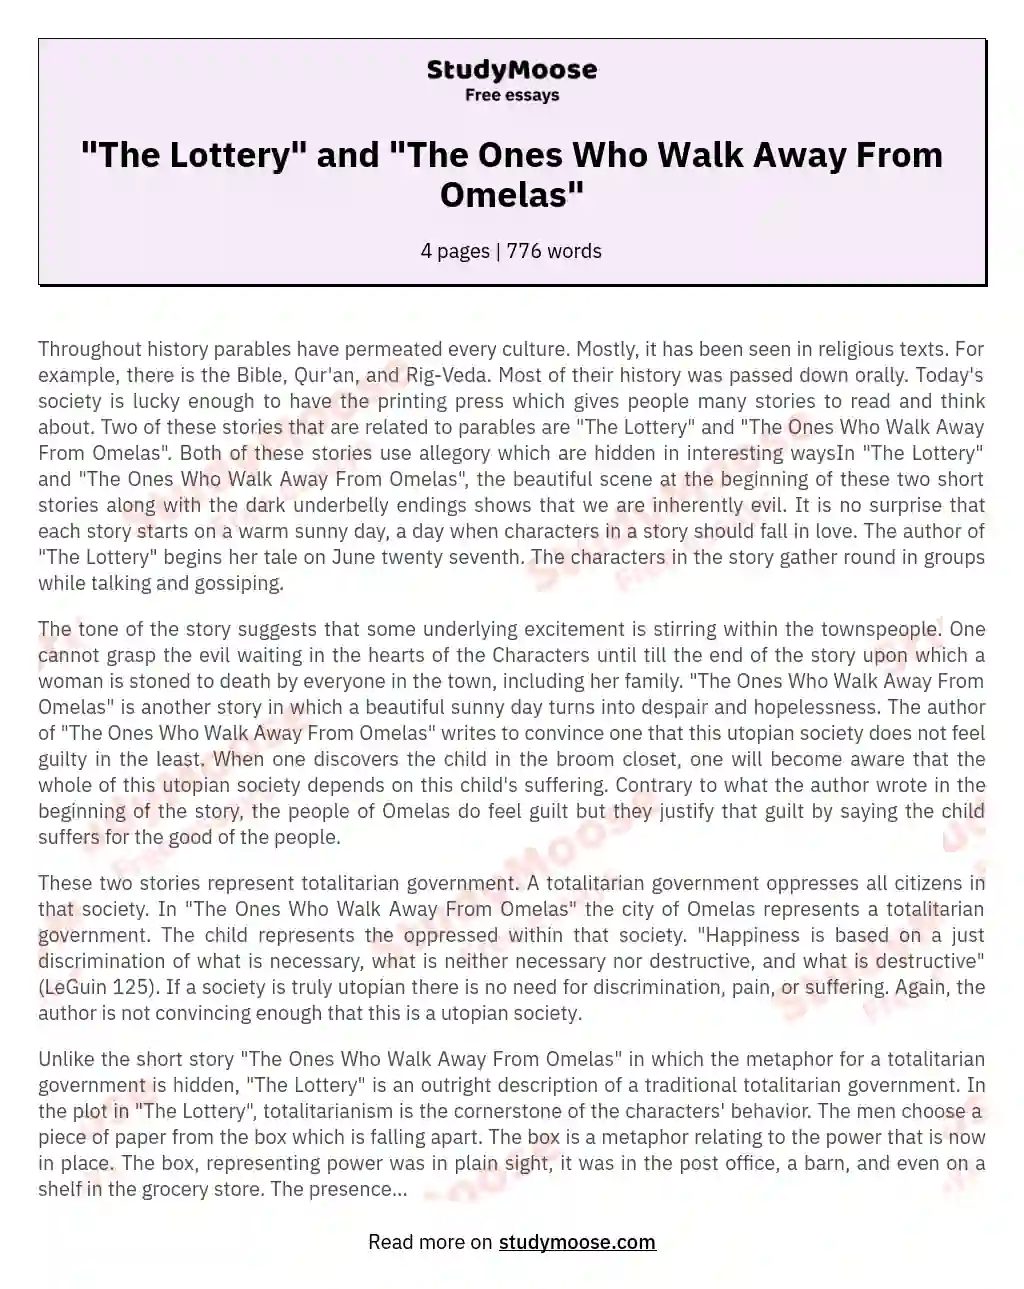 Exploring Dark Truths: Allegory and Symbolism in "The Lottery" and "The Ones essay